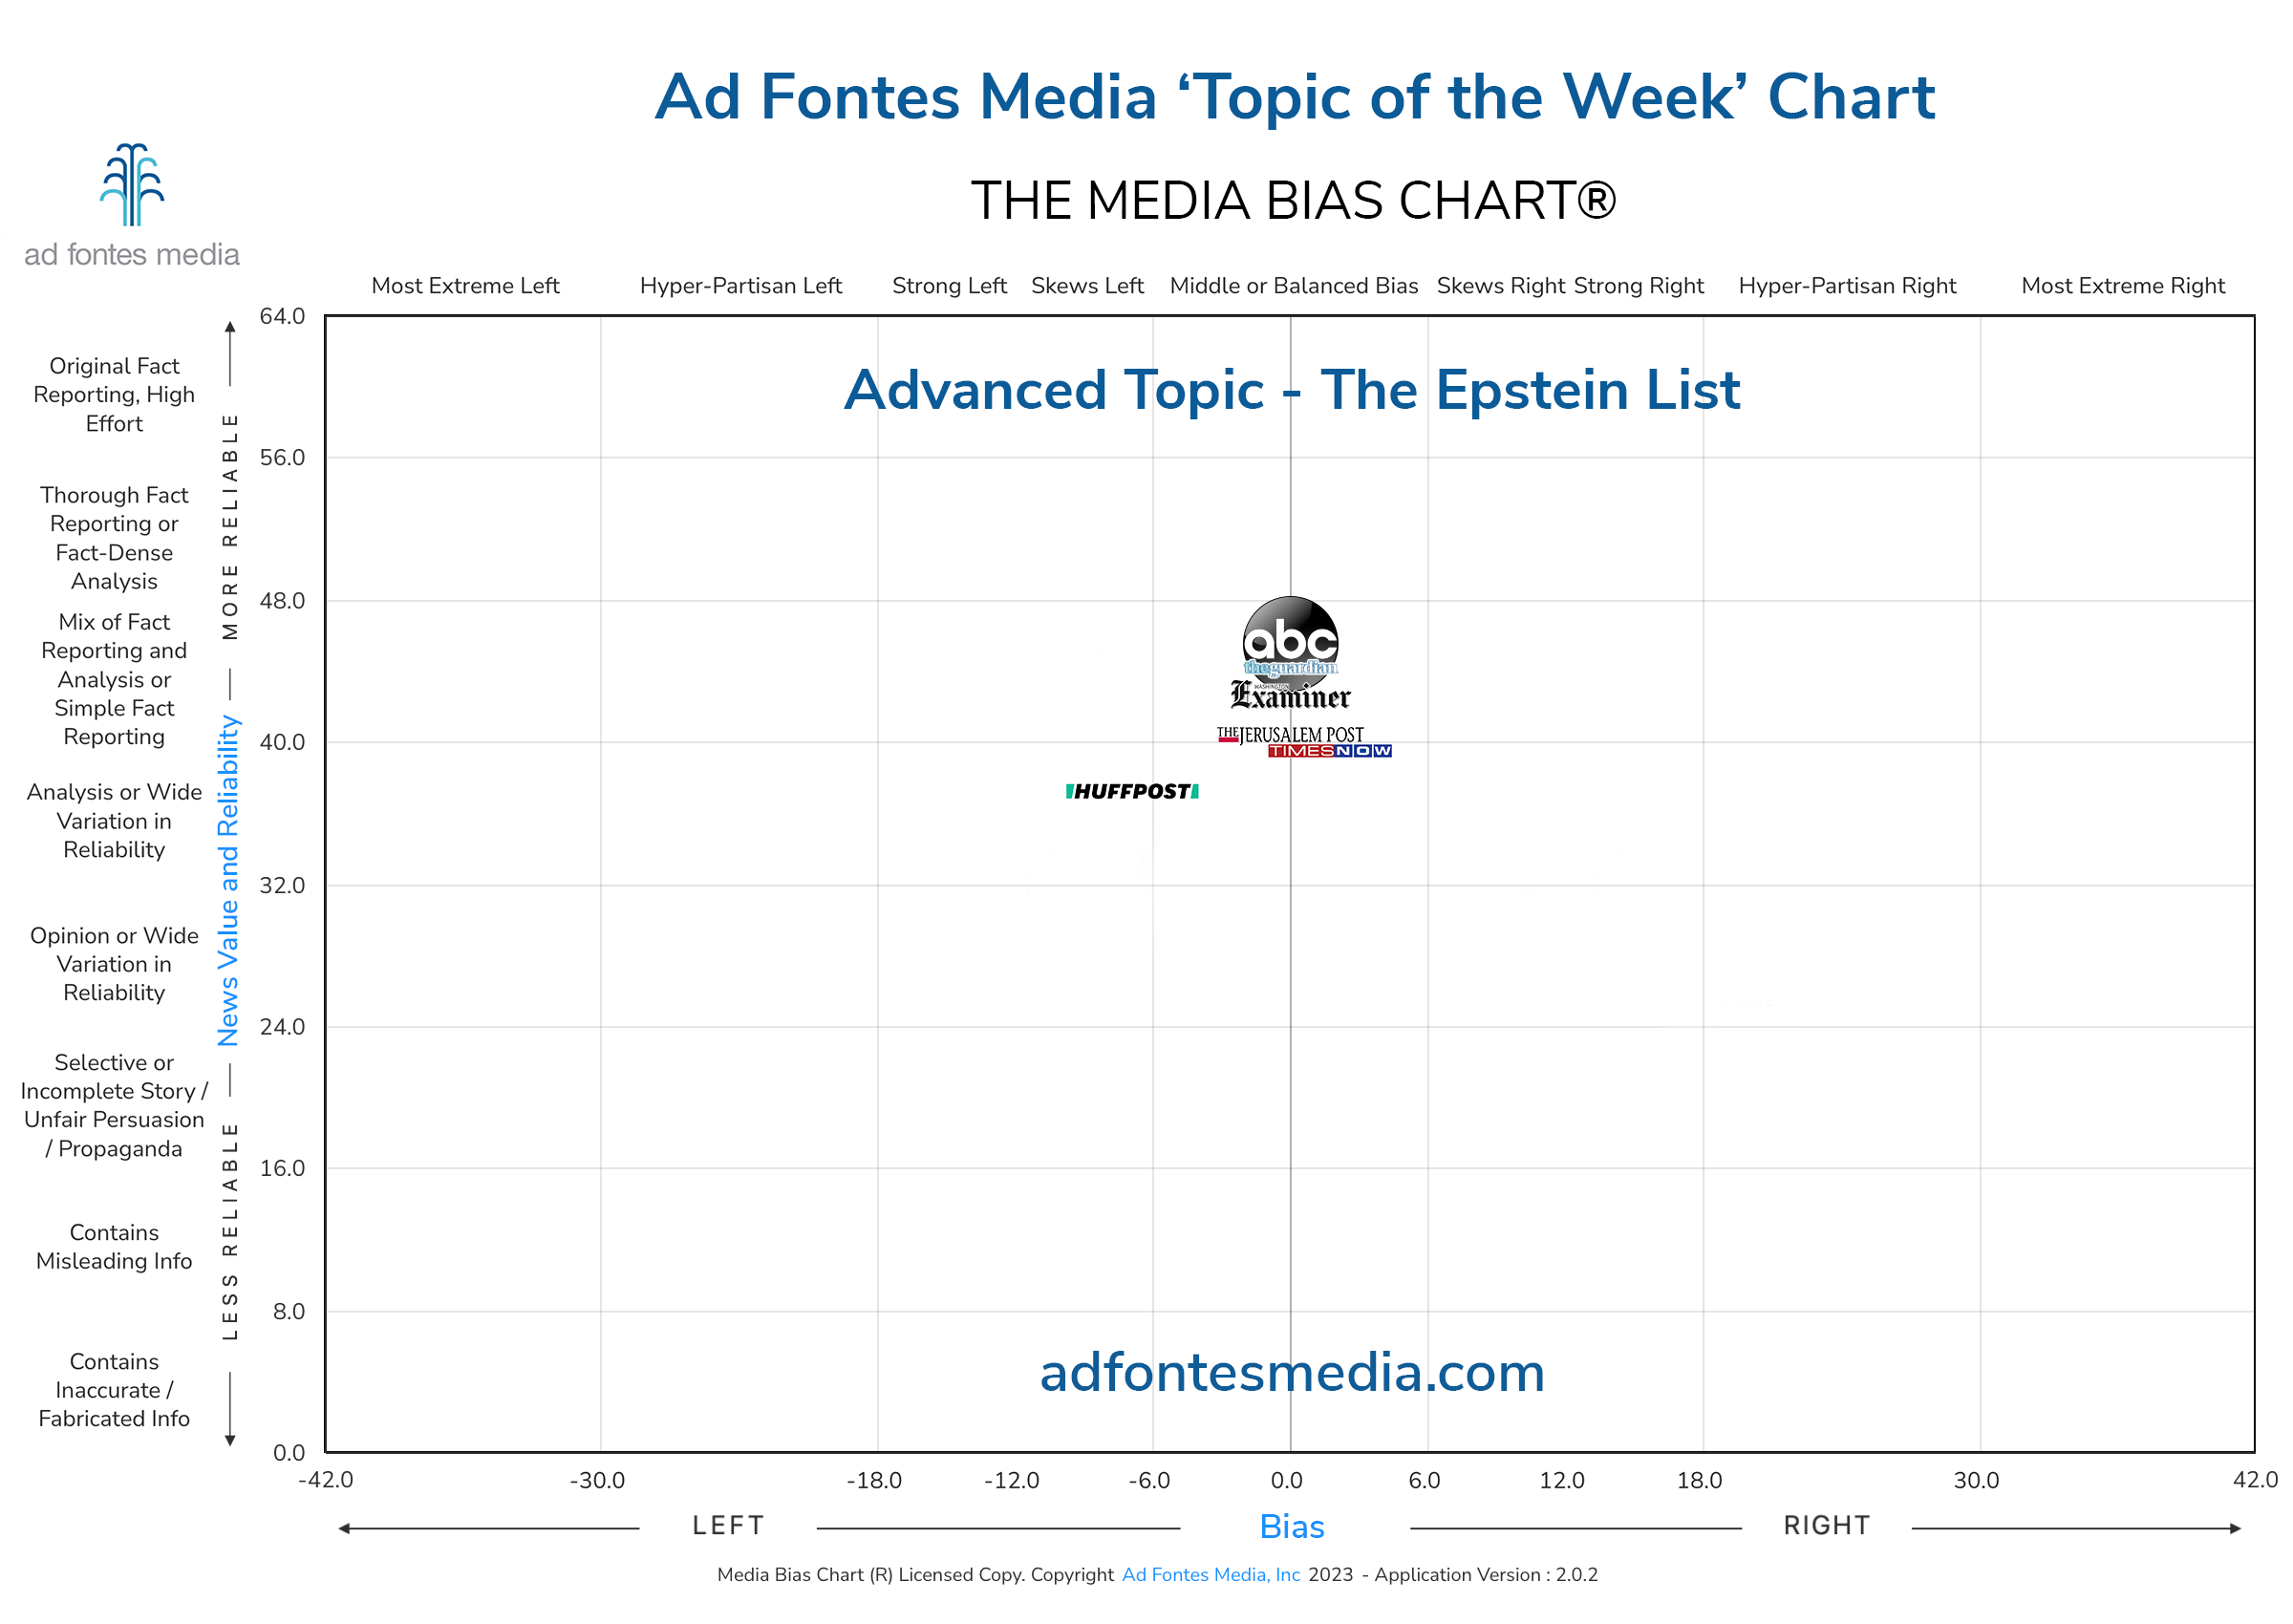 Media Bias Chart Examines Reactions to the Upcoming Release of the Epstein List in this week’s Topic of the Week